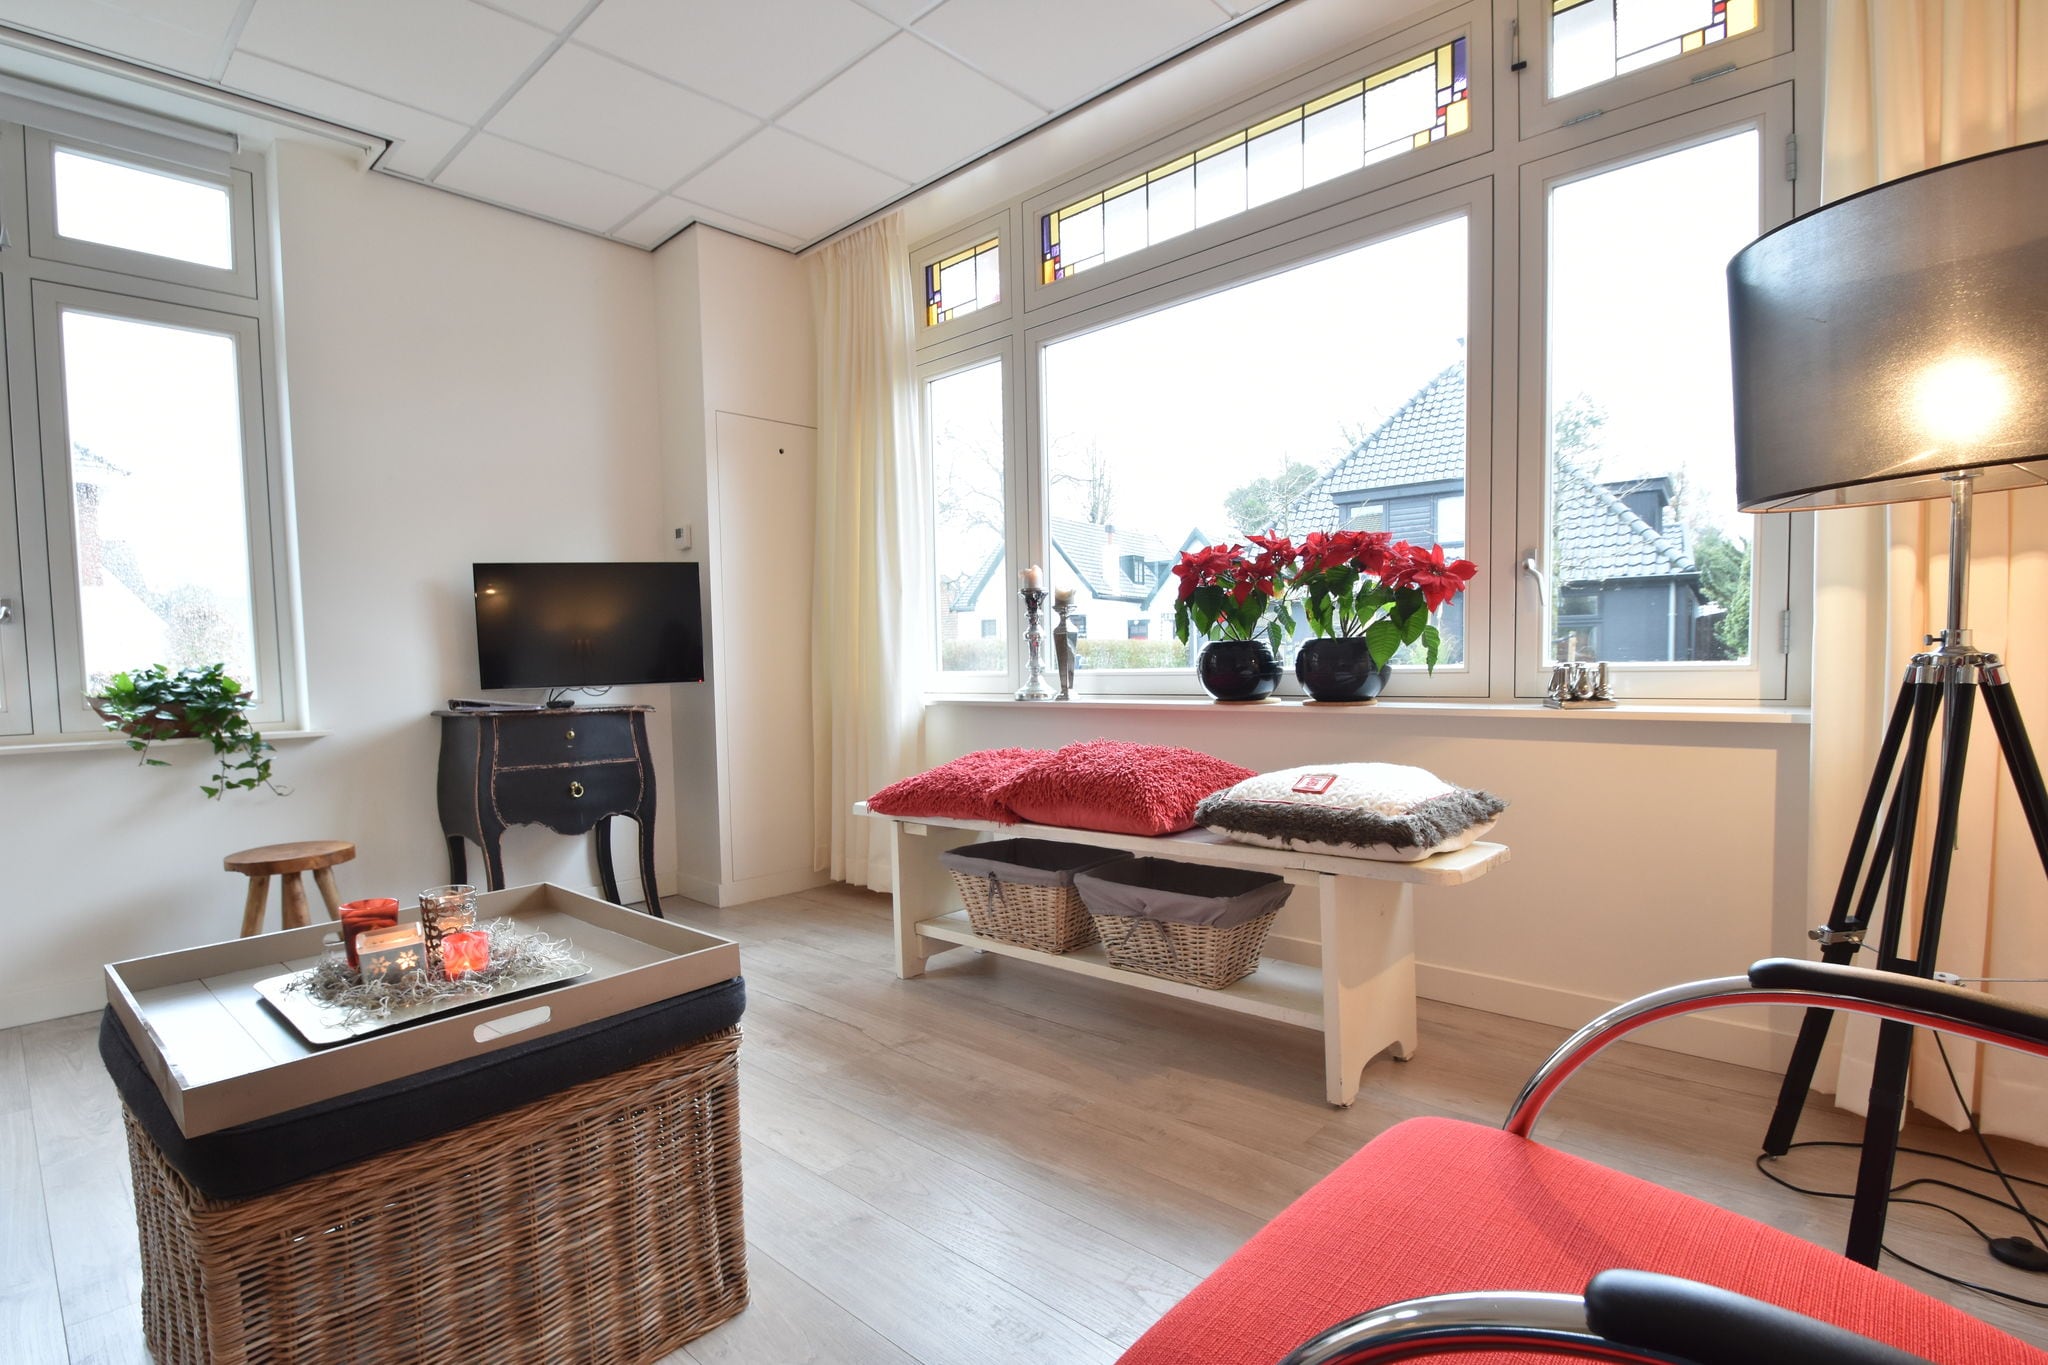 Attractive apartments within walking distance of Bergen's town centre